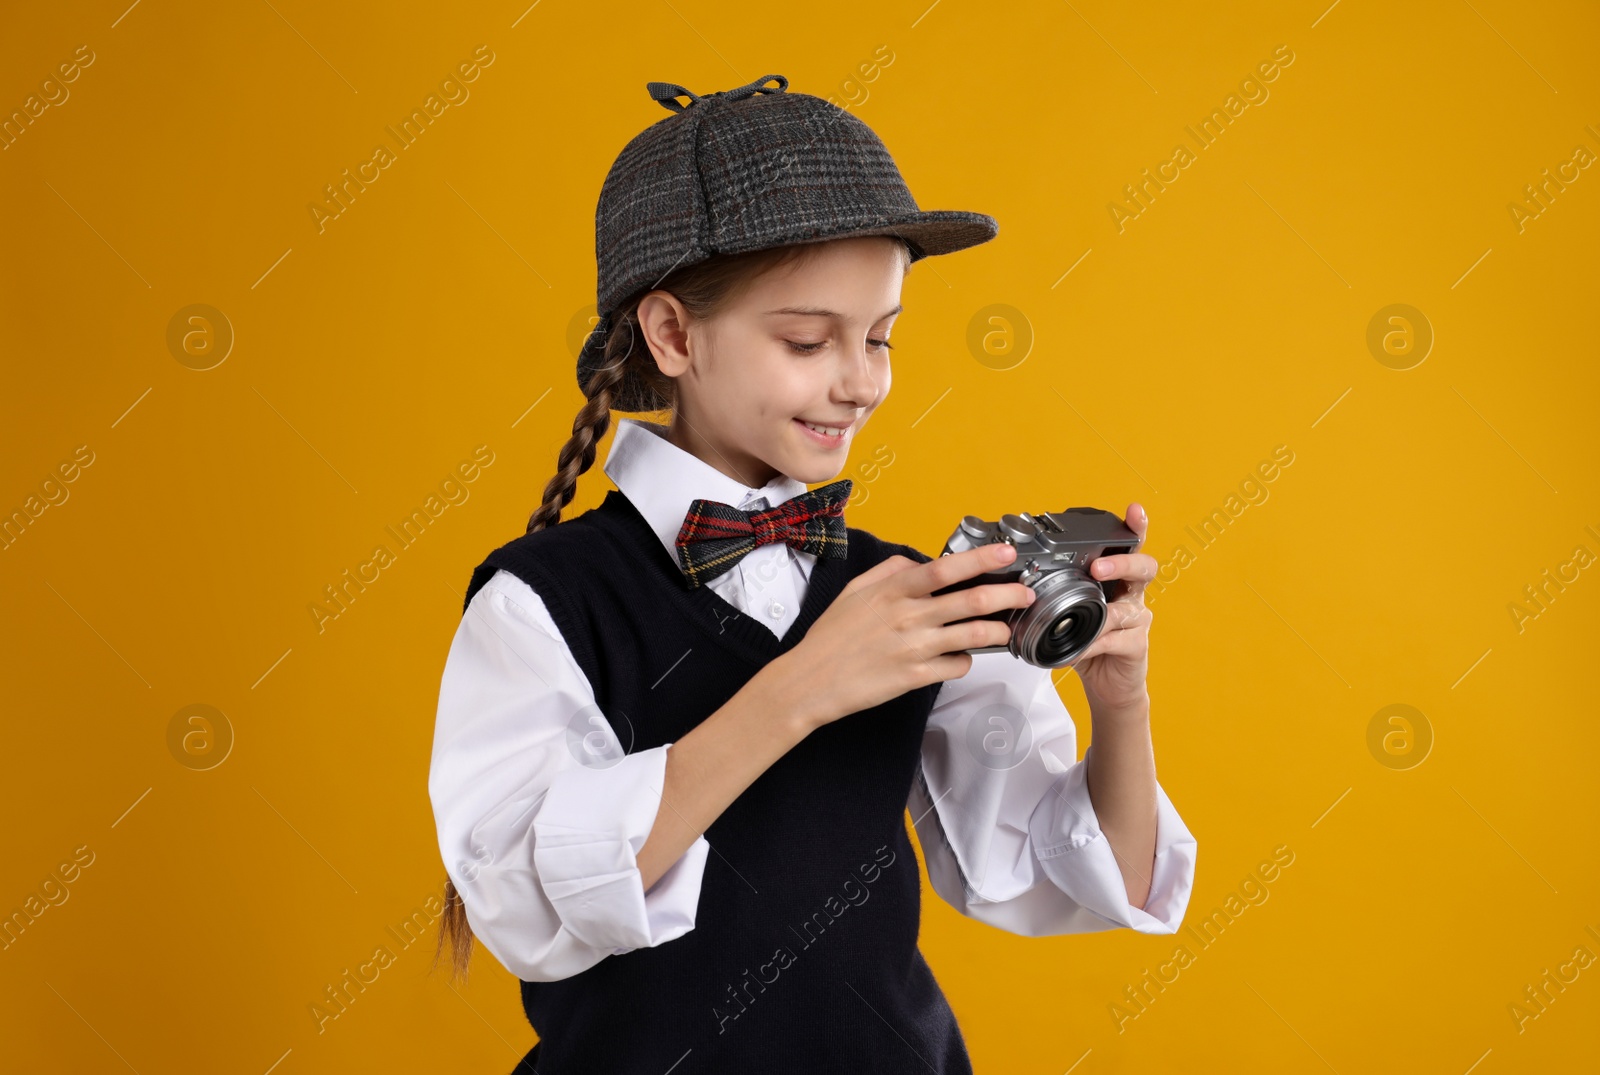 Photo of Cute little detective with vintage camera on yellow background